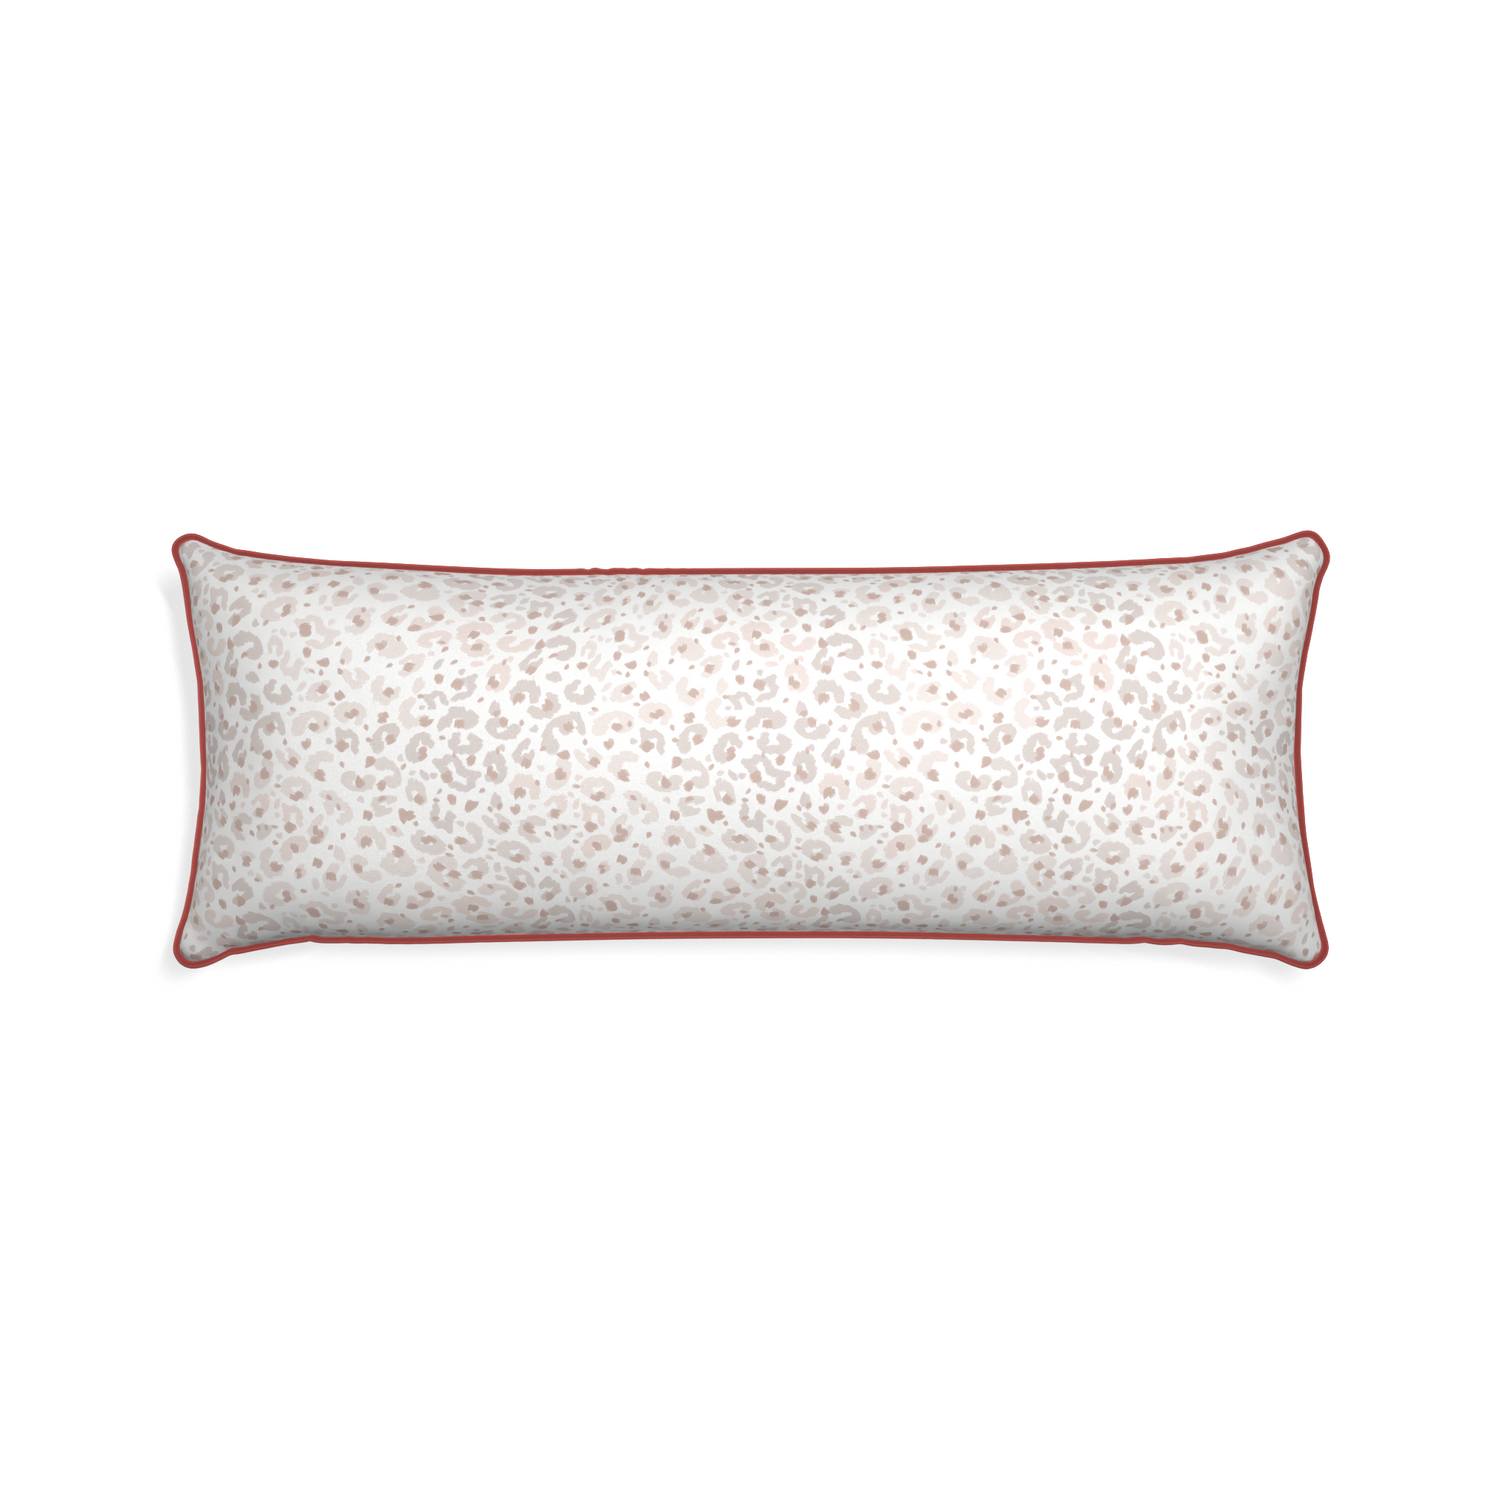 Xl-lumbar rosie custom beige animal printpillow with c piping on white background